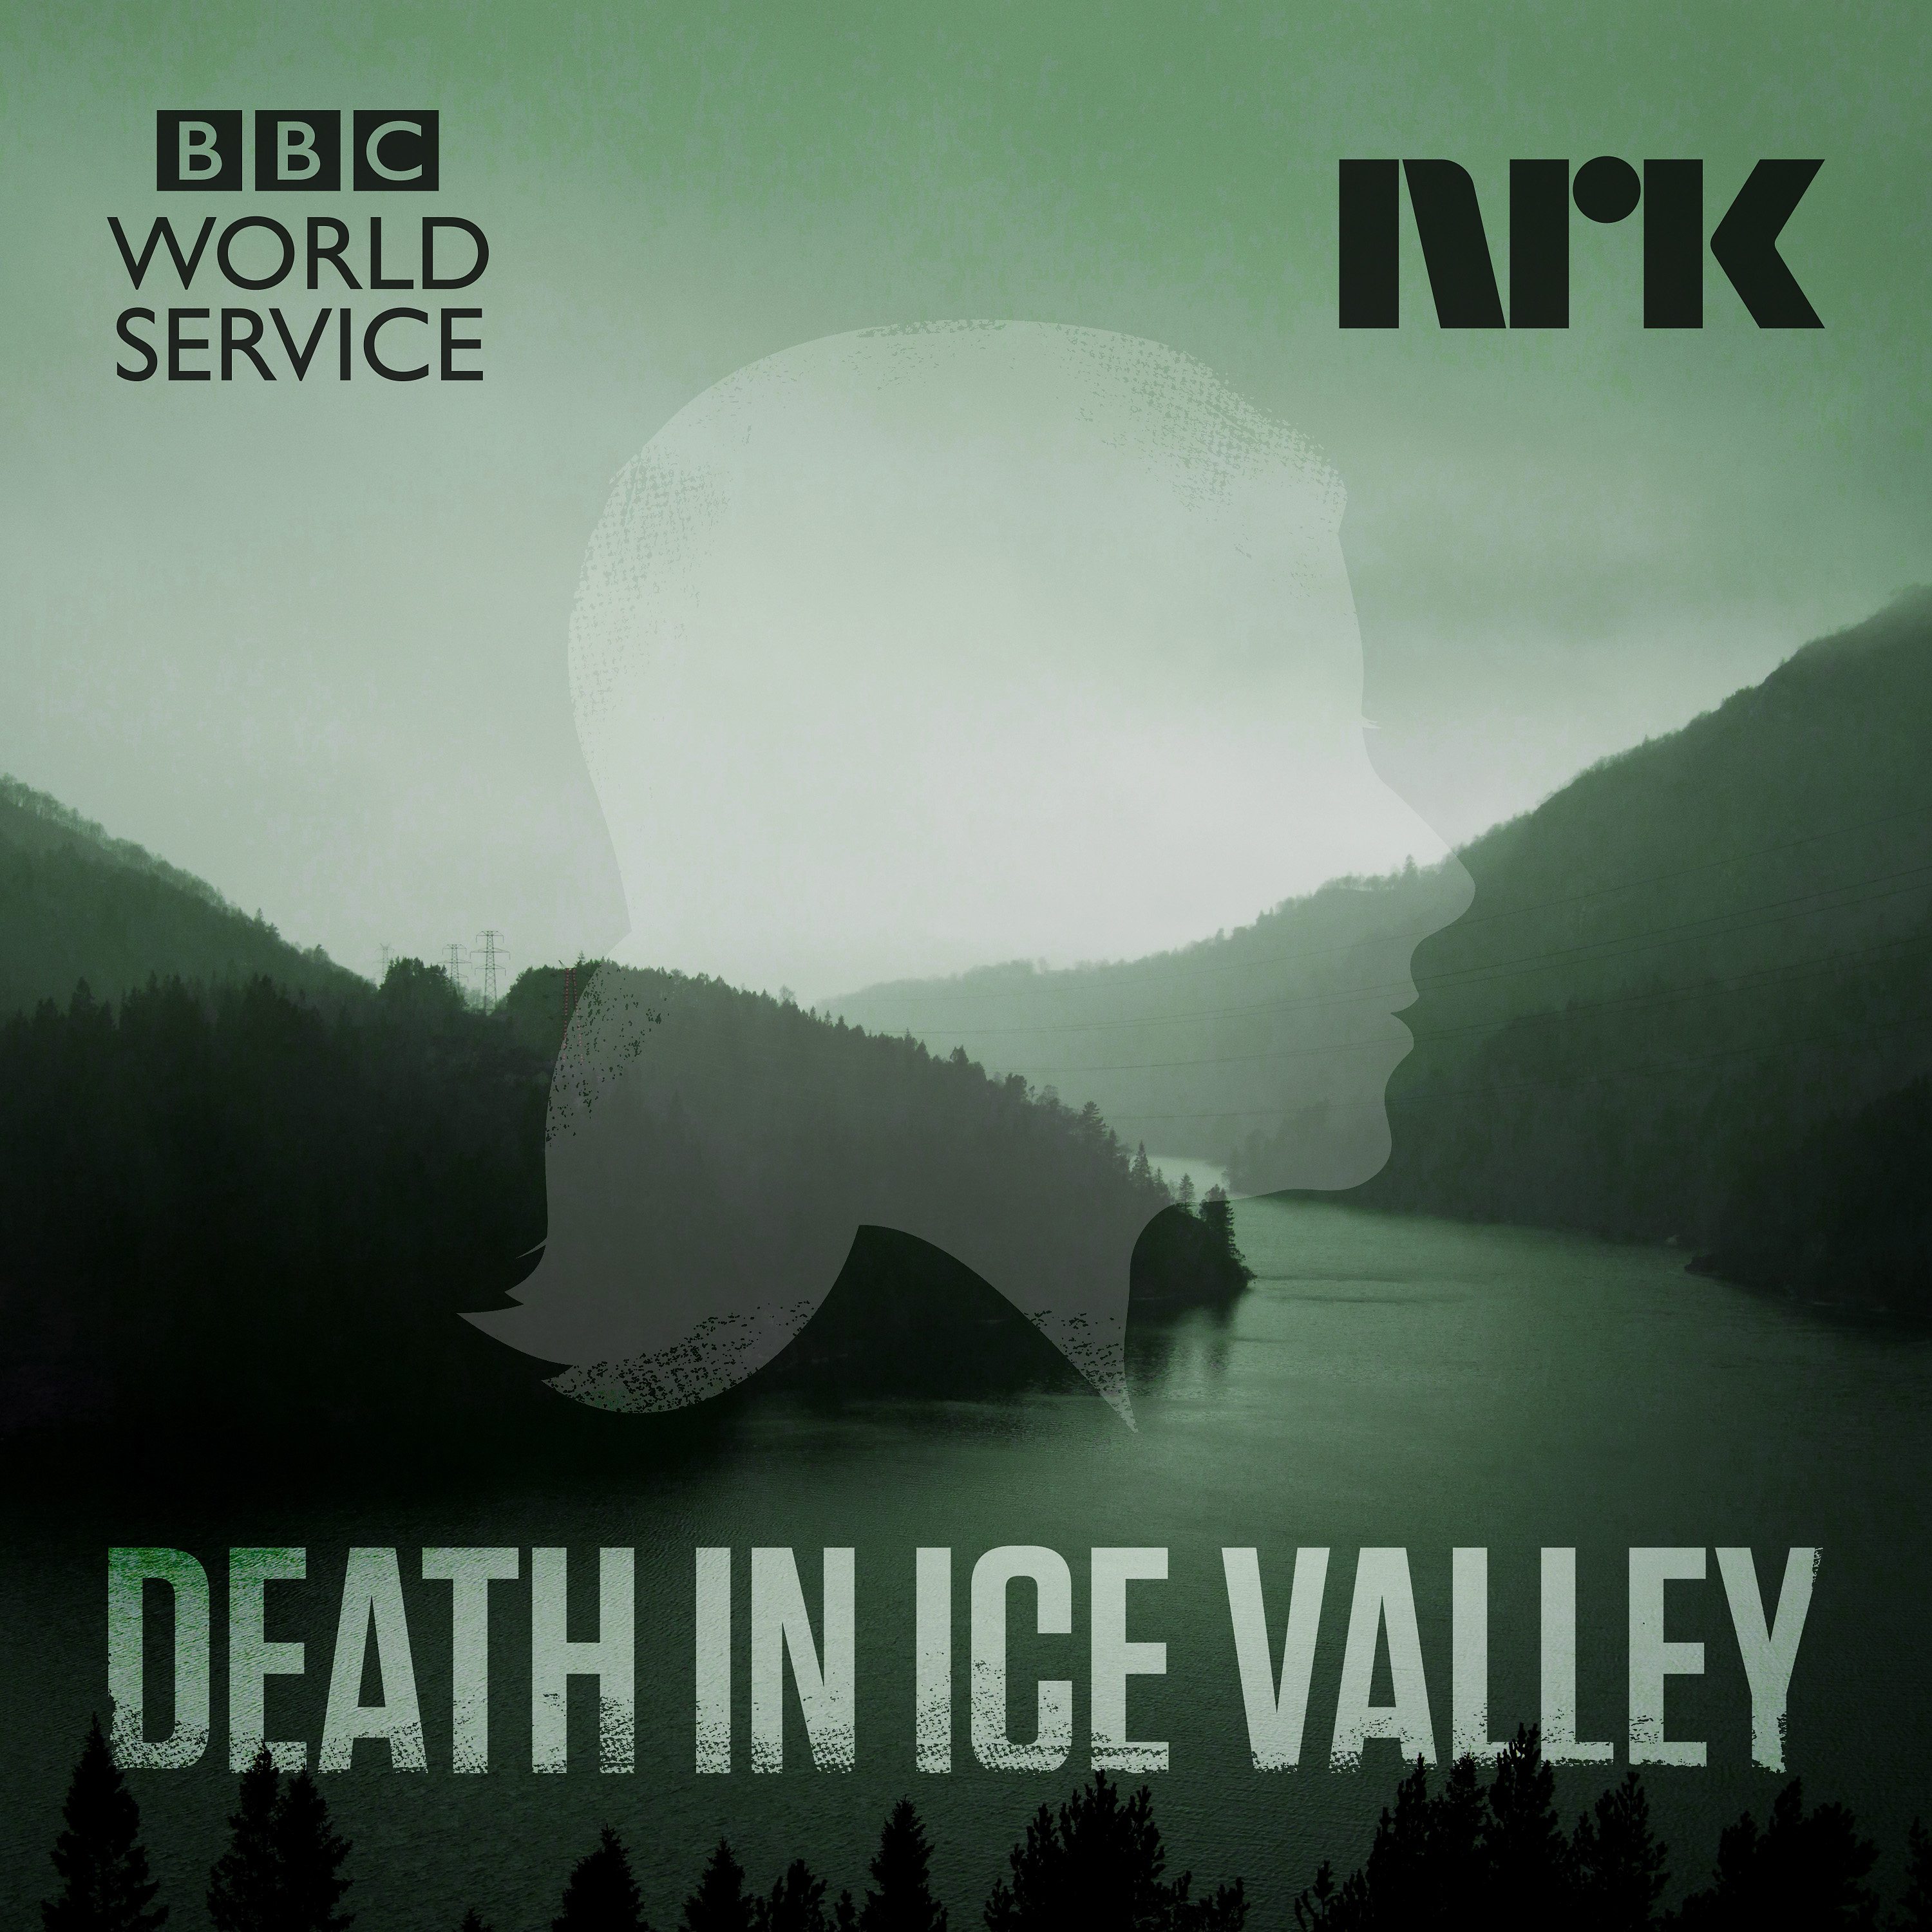 Death in Ice Valley podcast show image